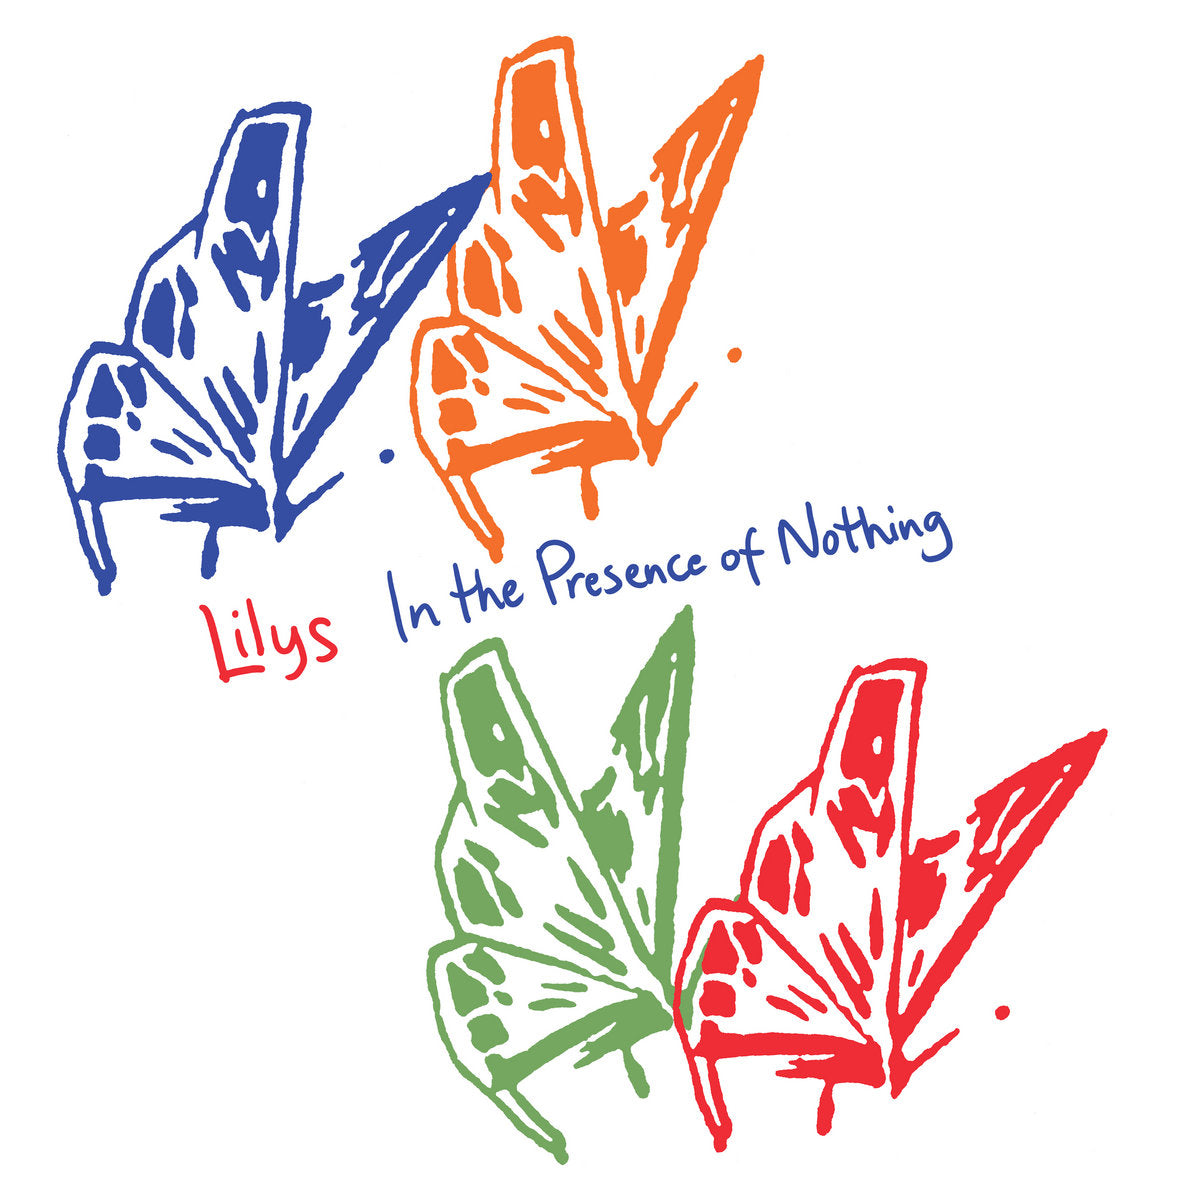 Lilys - In The Presence of Nothing